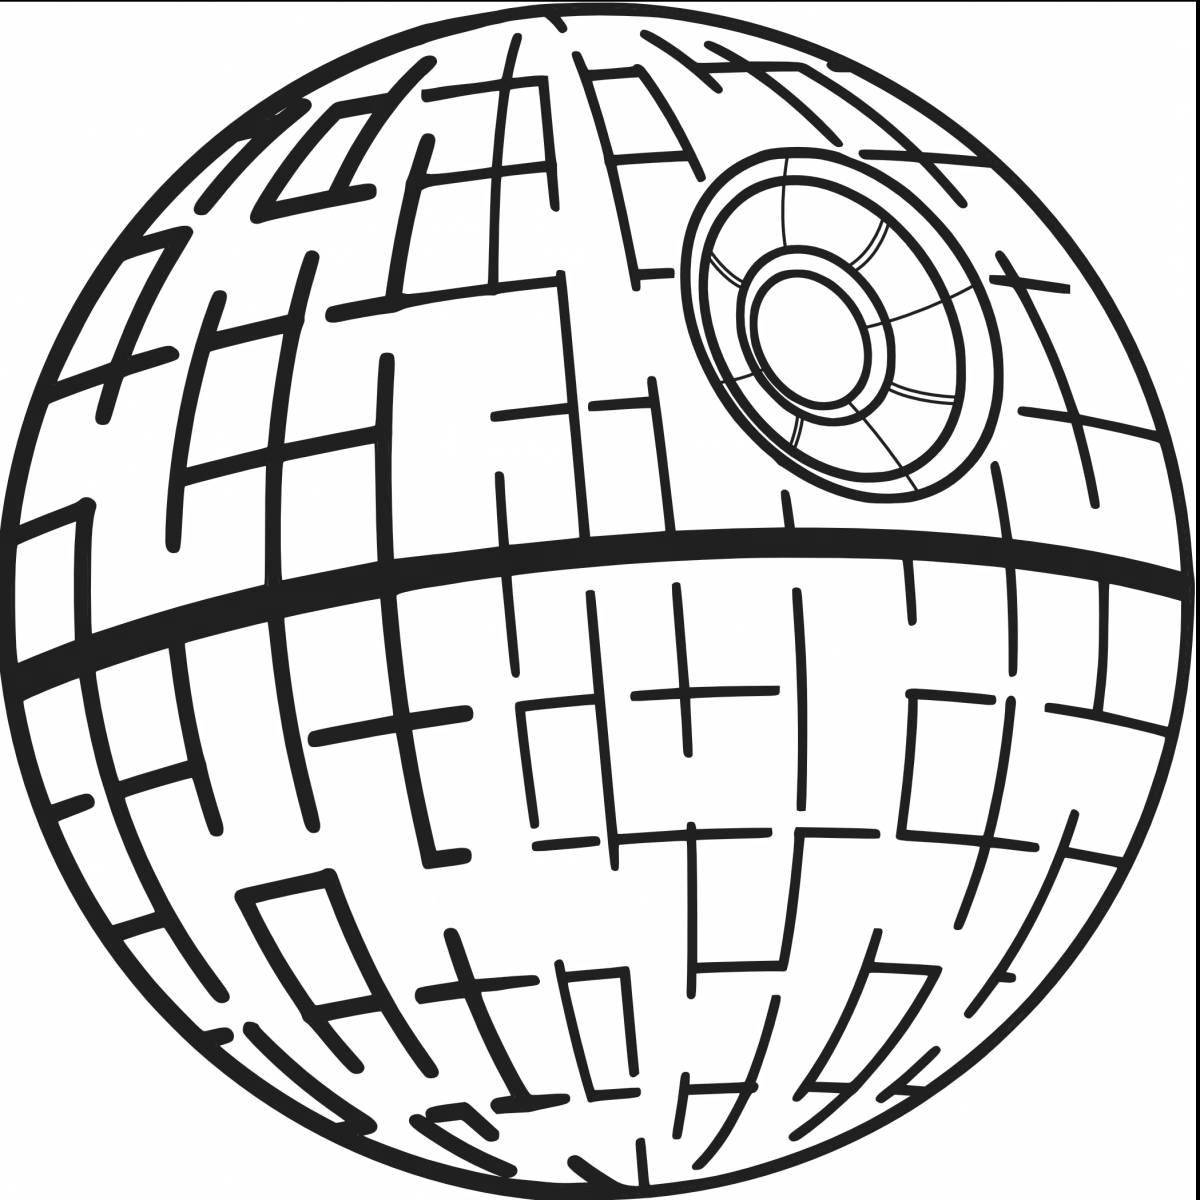 Death star coloring page